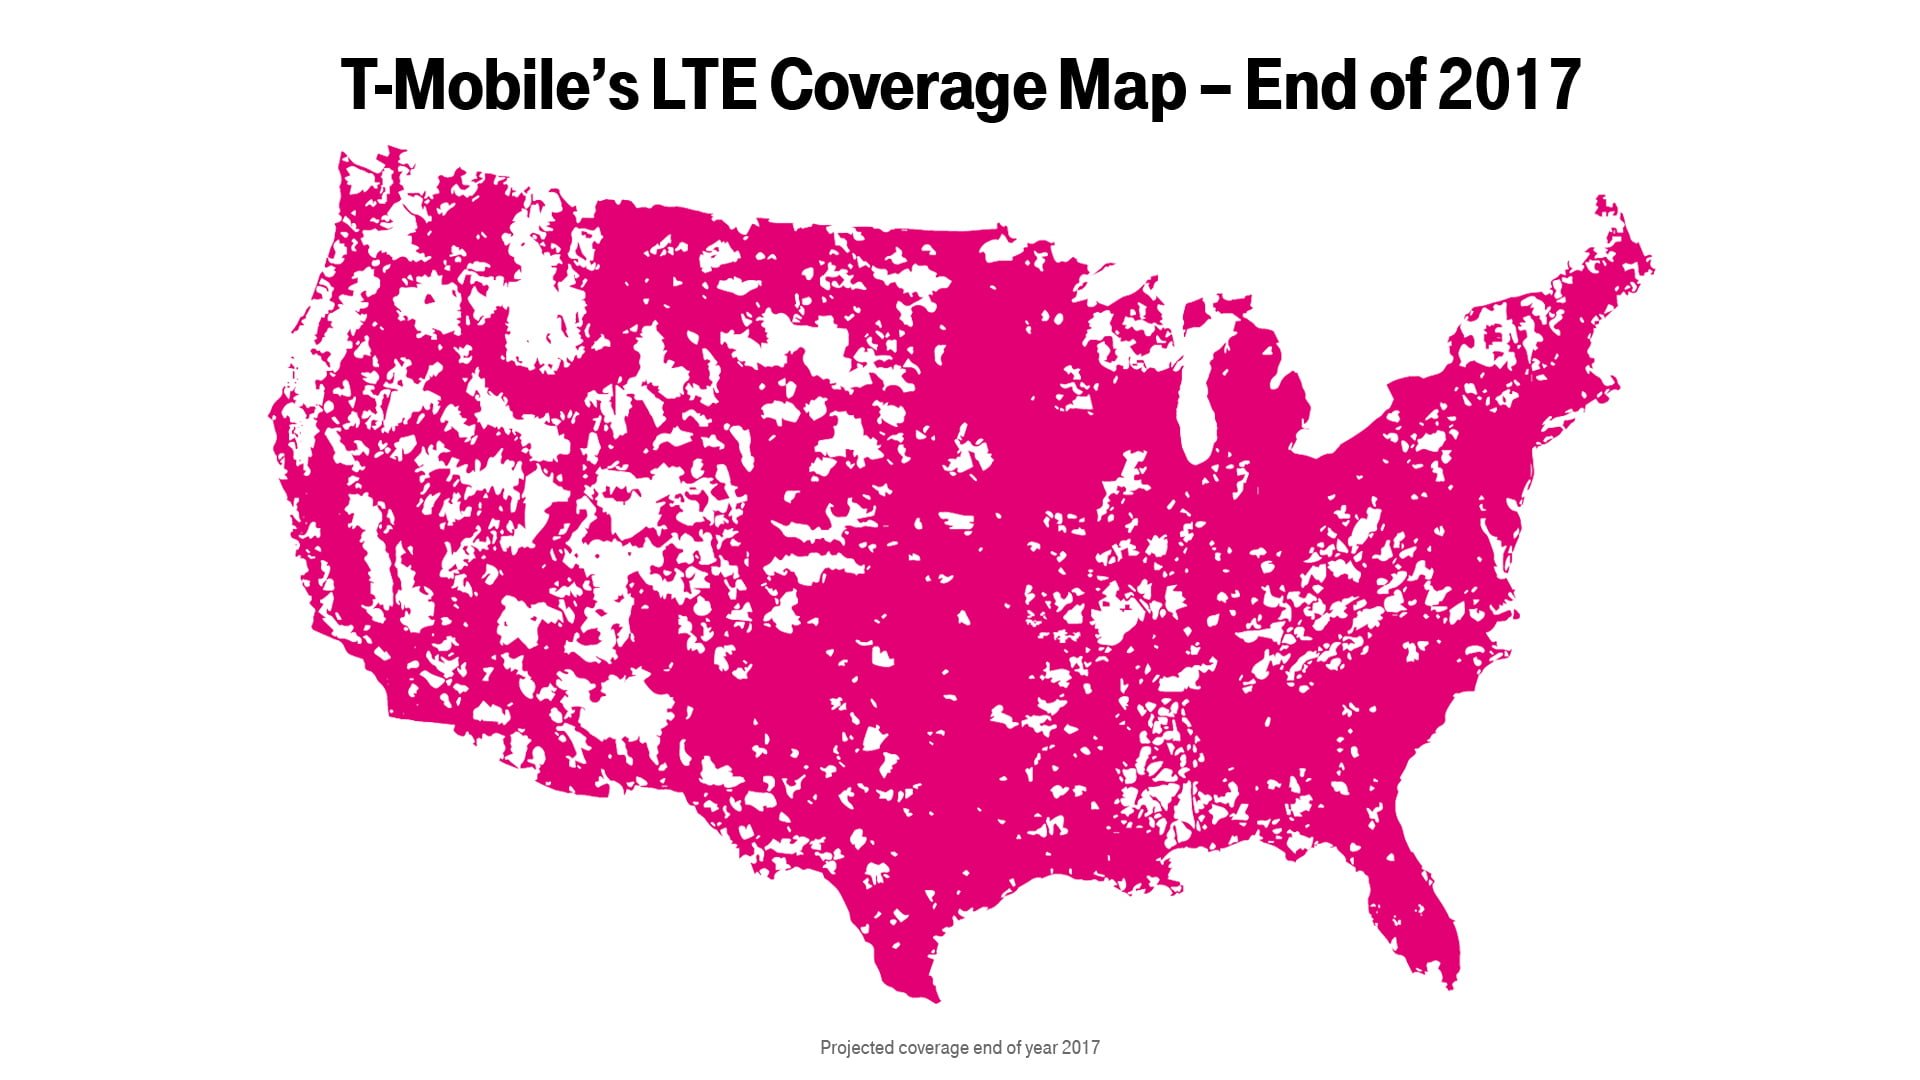 T-Mobile Wins Big at 600MHz Auction – Wins 45% of Spectrum Covering 100% of the US